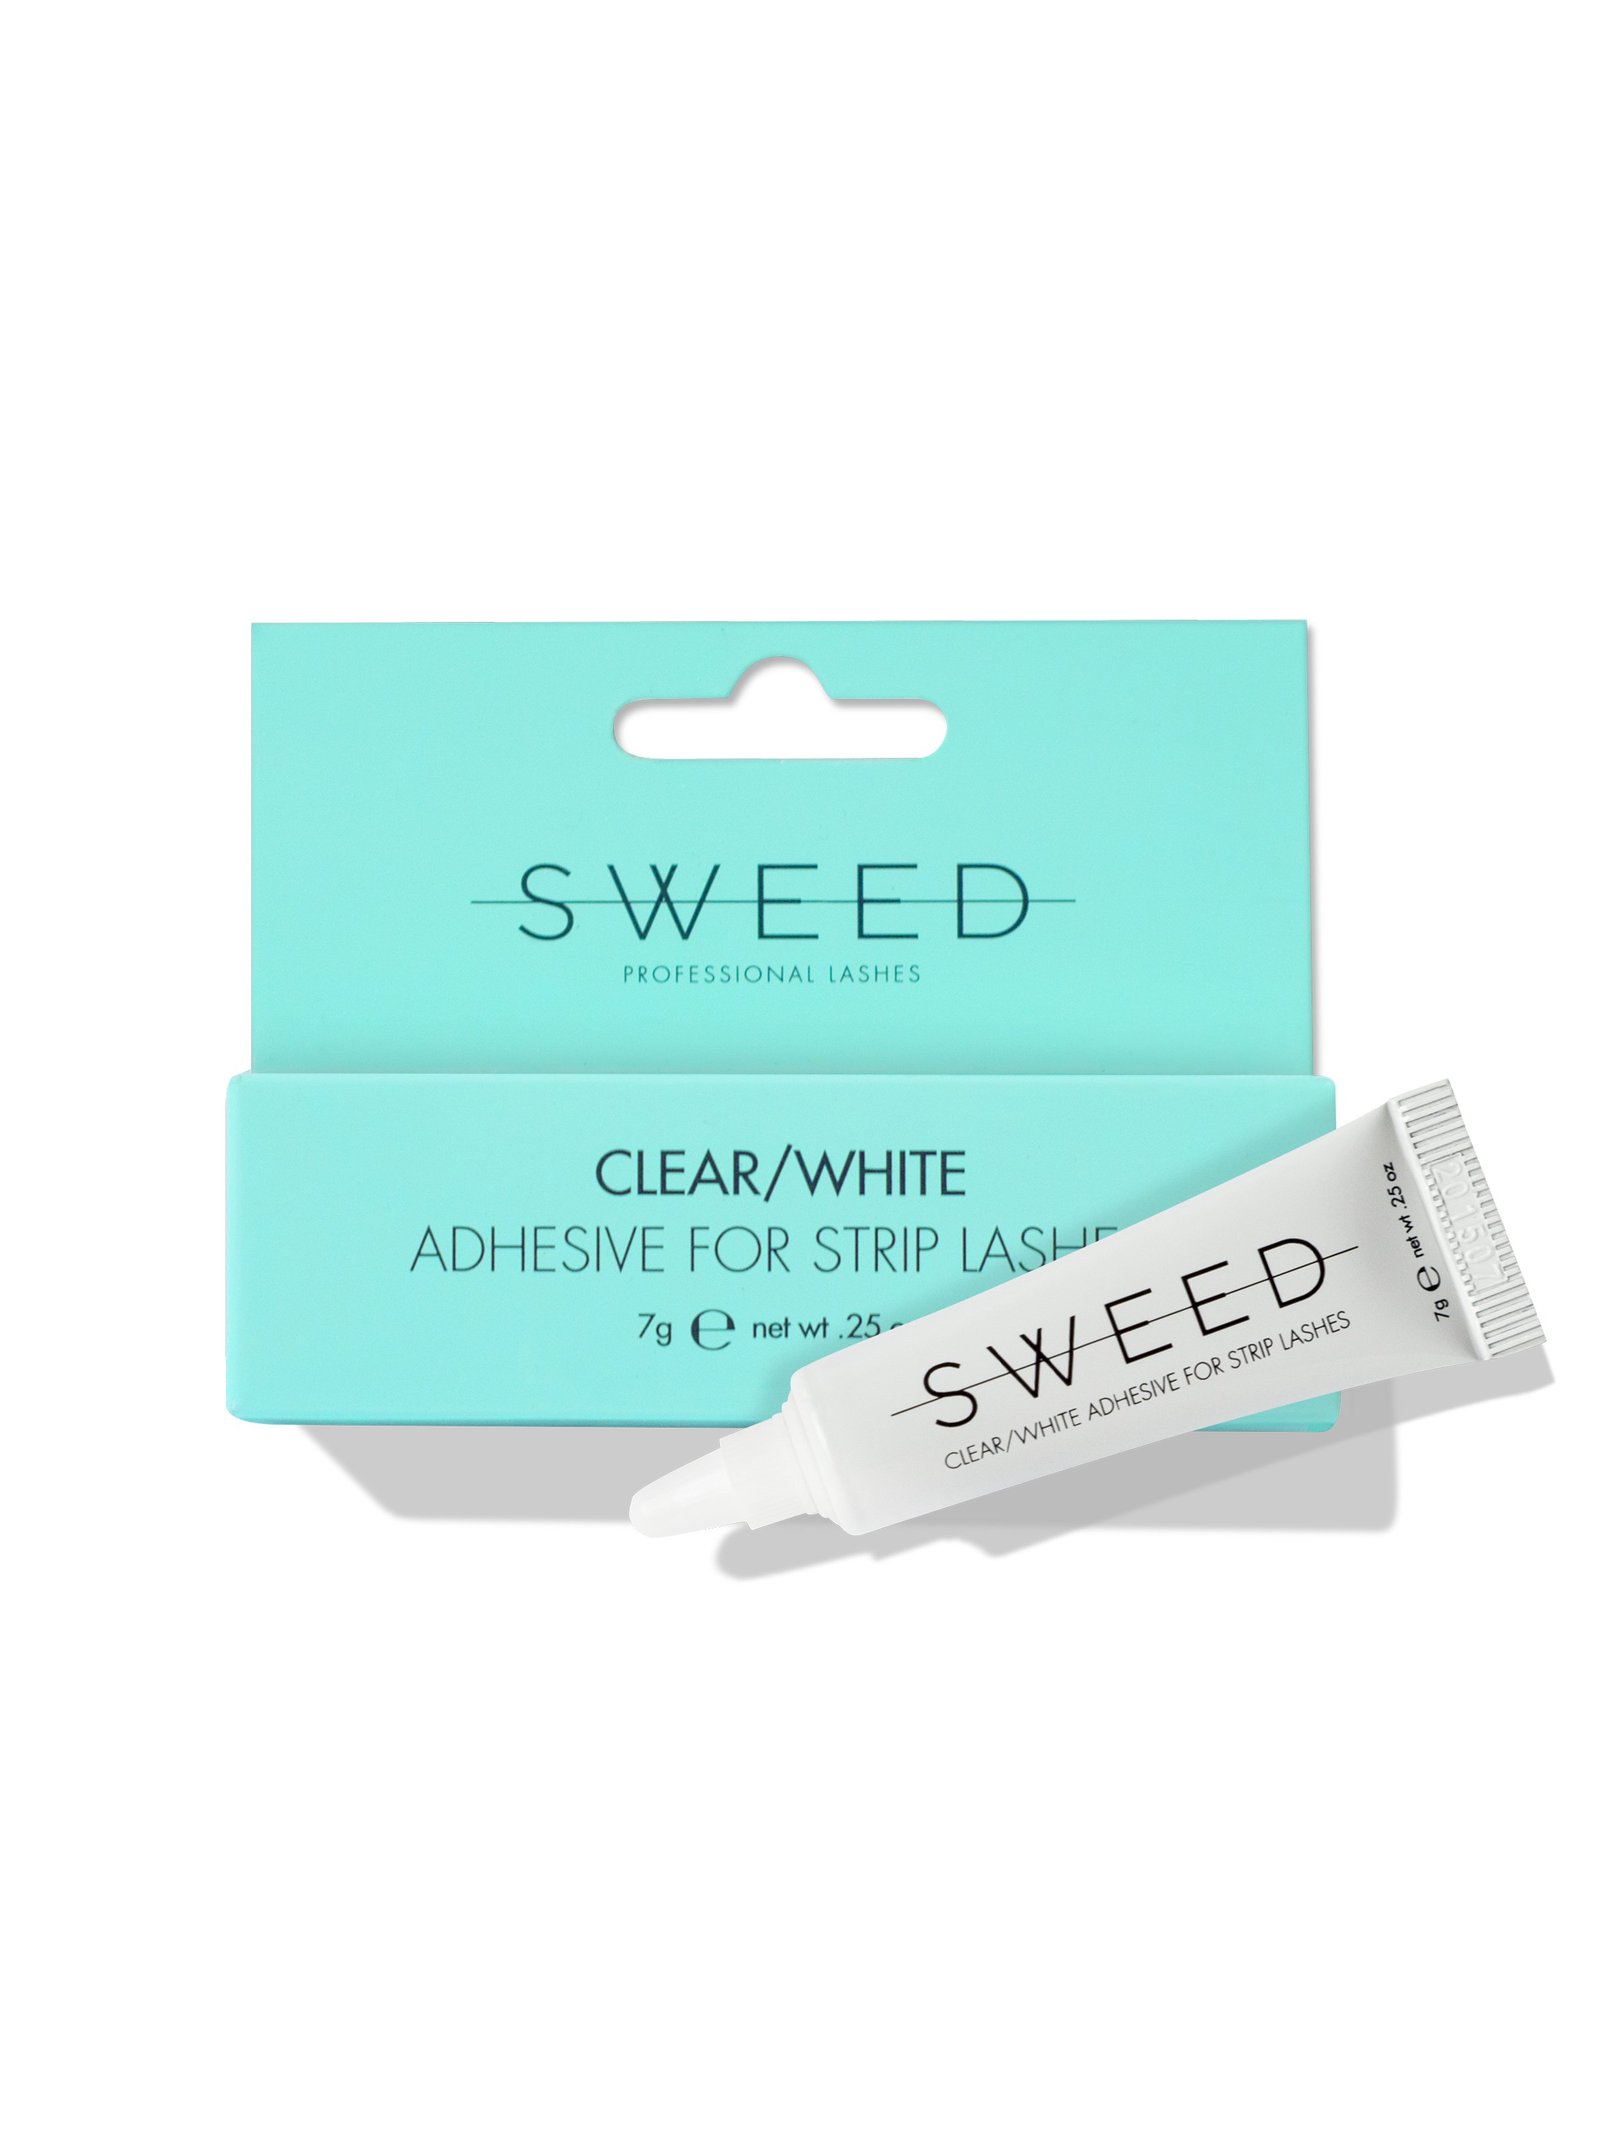 SWEED Adhesive for Strip Lashes Clear/White